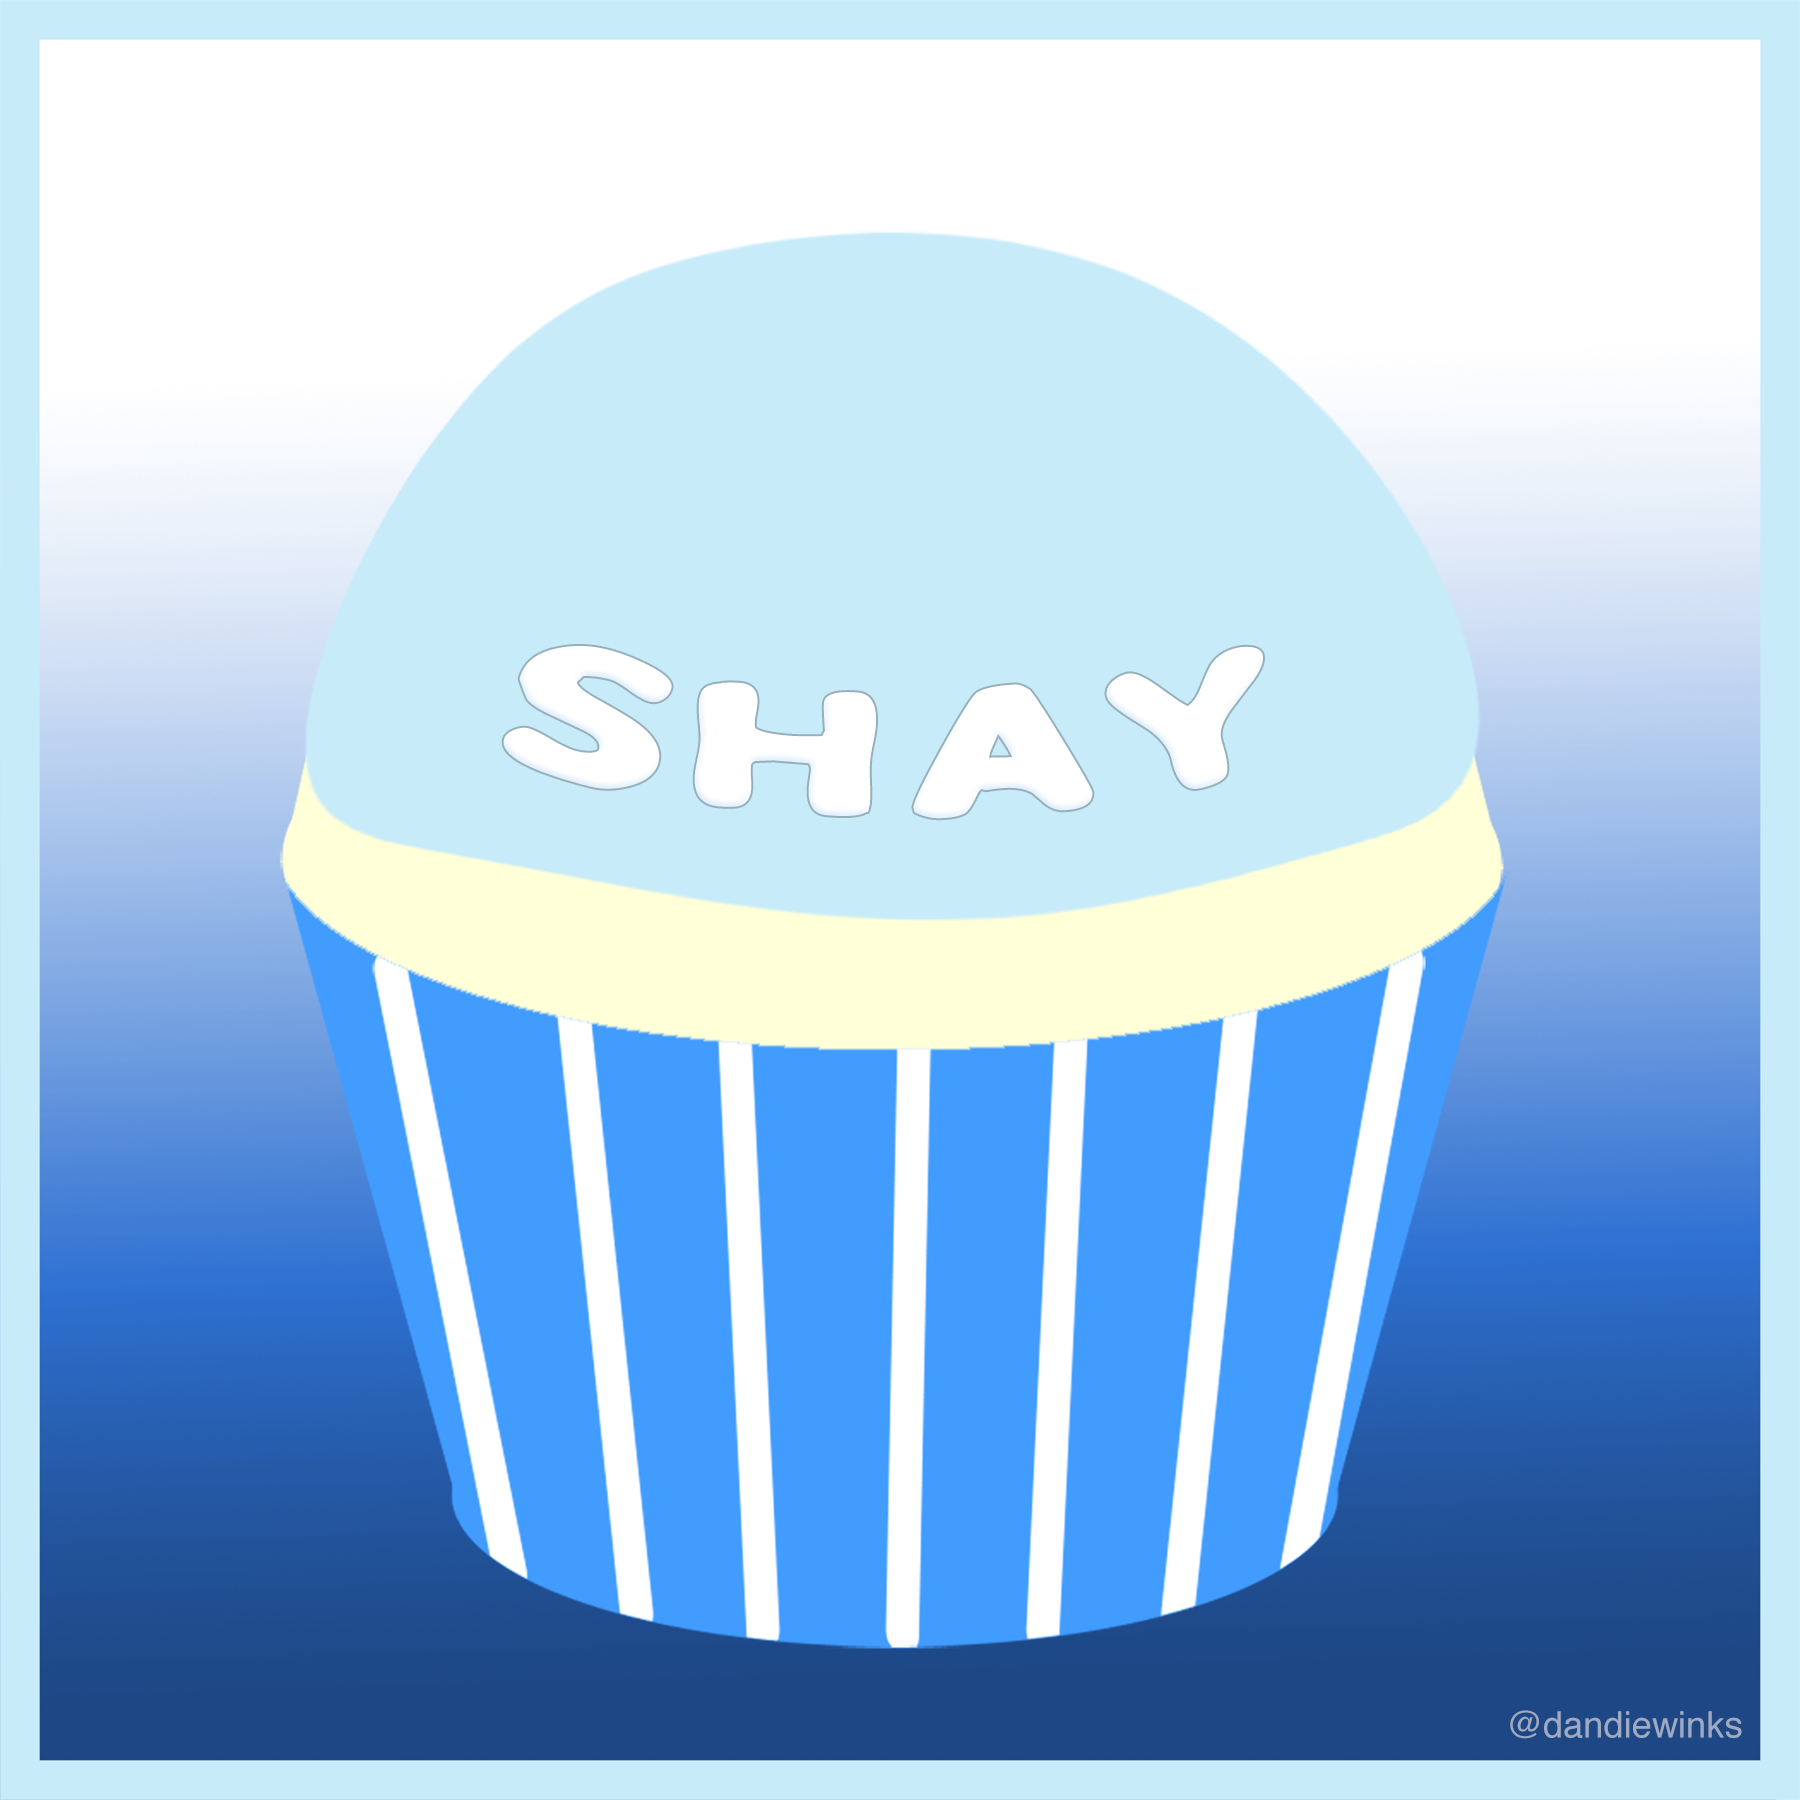 Shay's remembrance cupcake